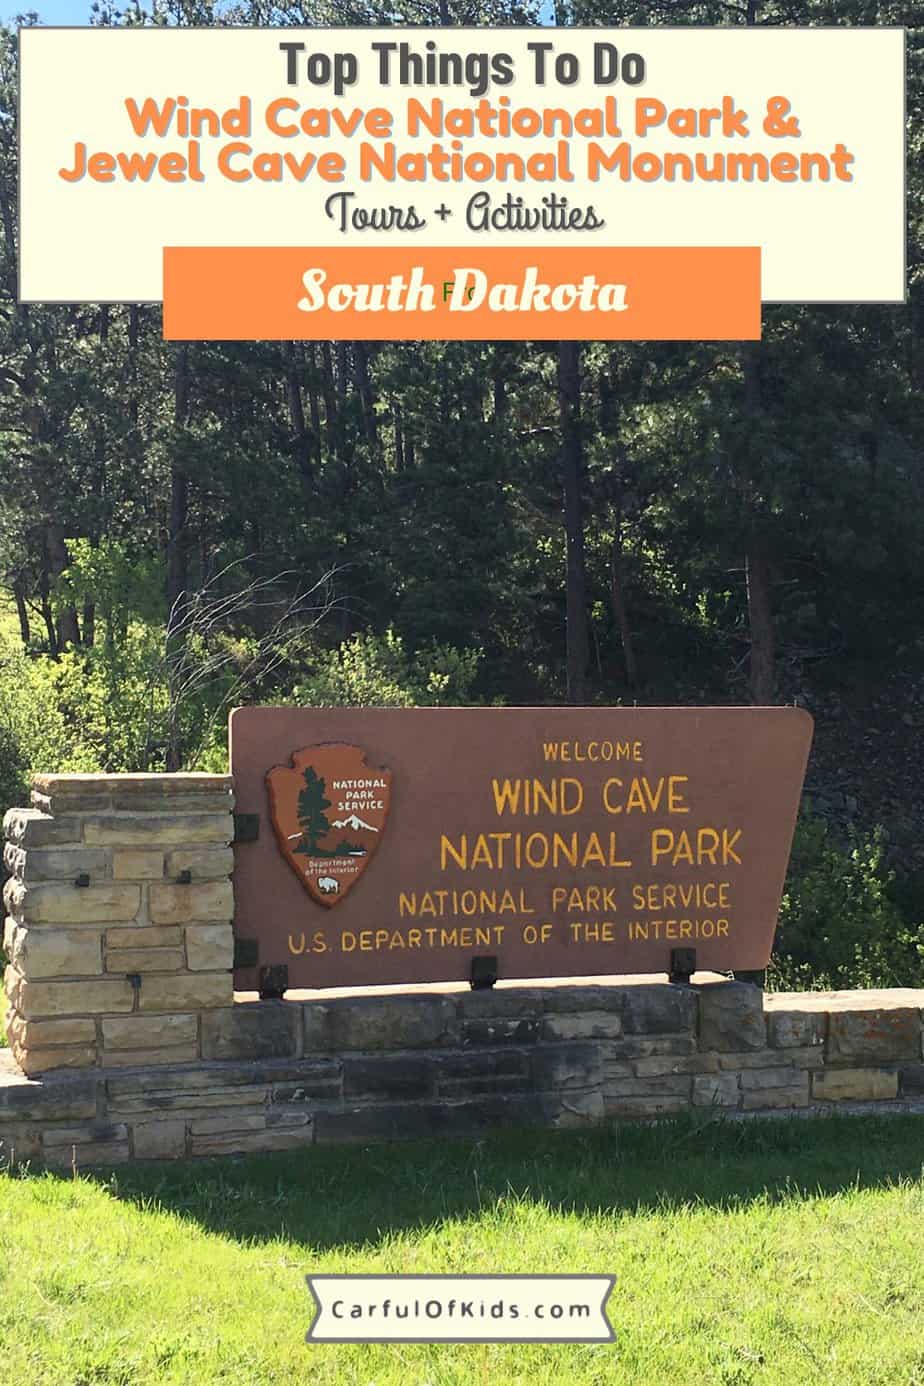 Add Wind Cave or Jewel Cave to your South Dakota itinerary when you visit the Black Hills. Got all the details for visiting, like cave tour descriptions, hiking, picnicking and camping. What to do at Wind Cave National Park | What to do to at Jewel Cave National Monument | Where to go in South Dakota #NationalParks #SouthDakota